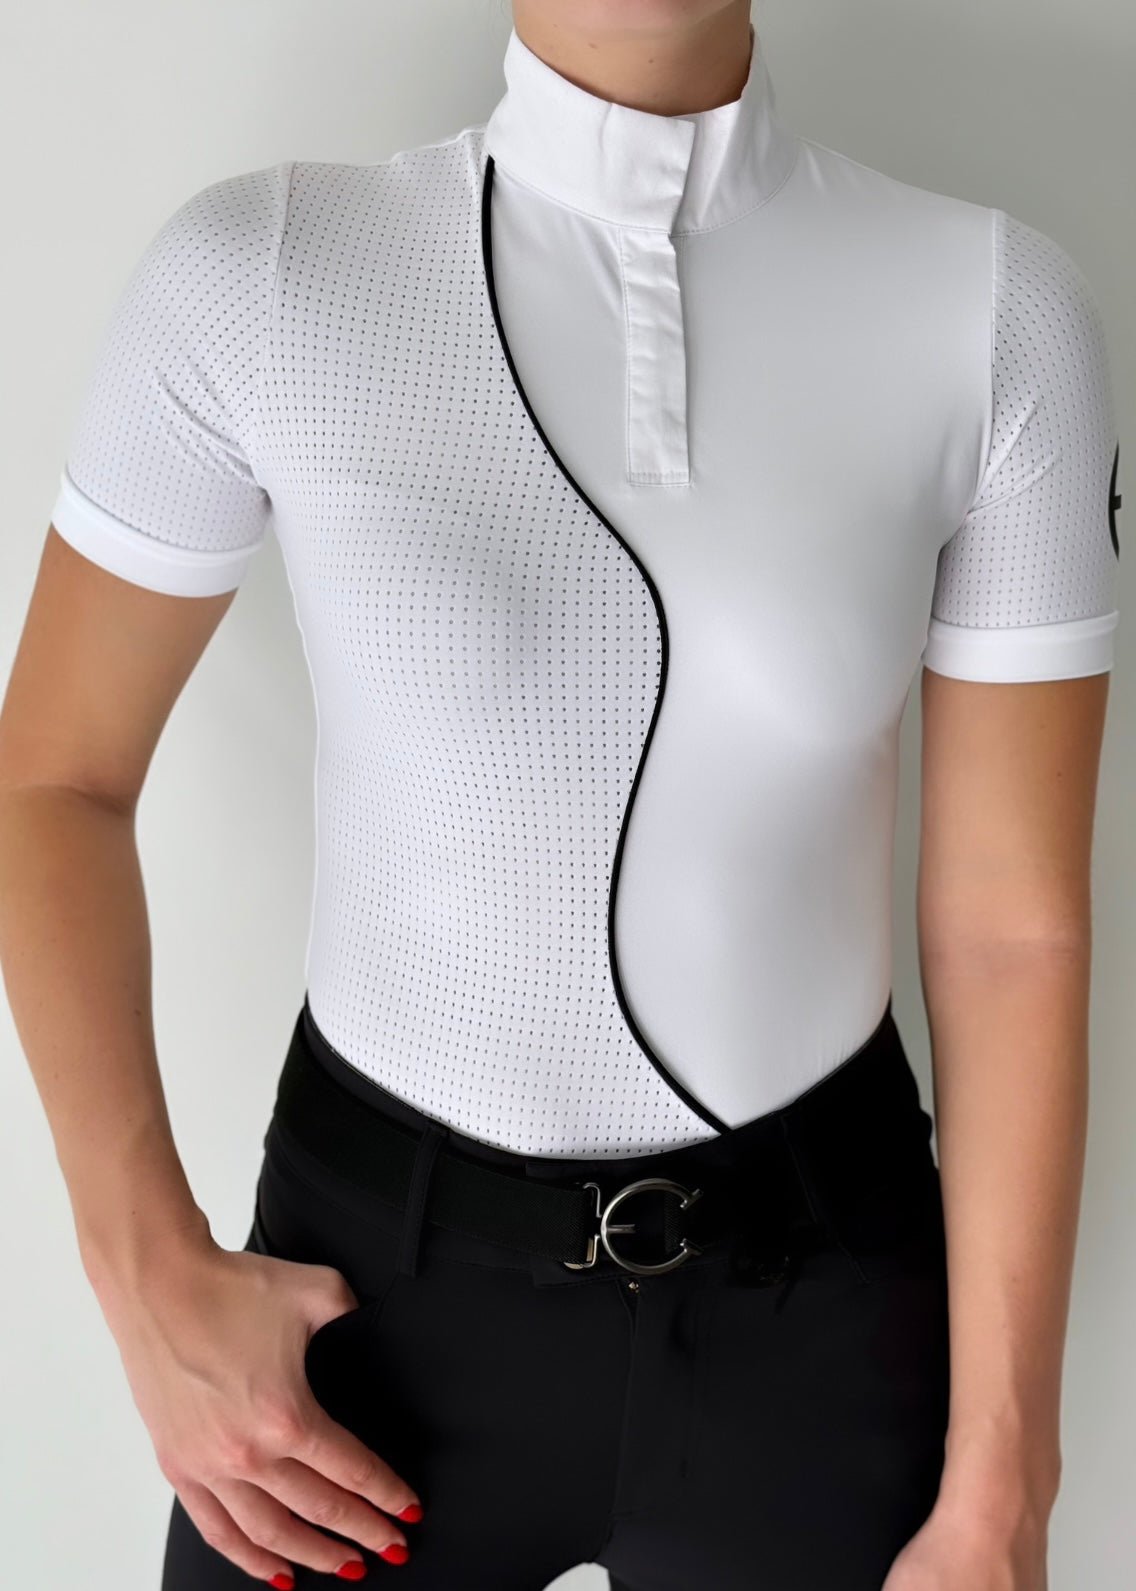 LENNA Short Sleeve Ventilated Show Shirt - Equiluxe Tack